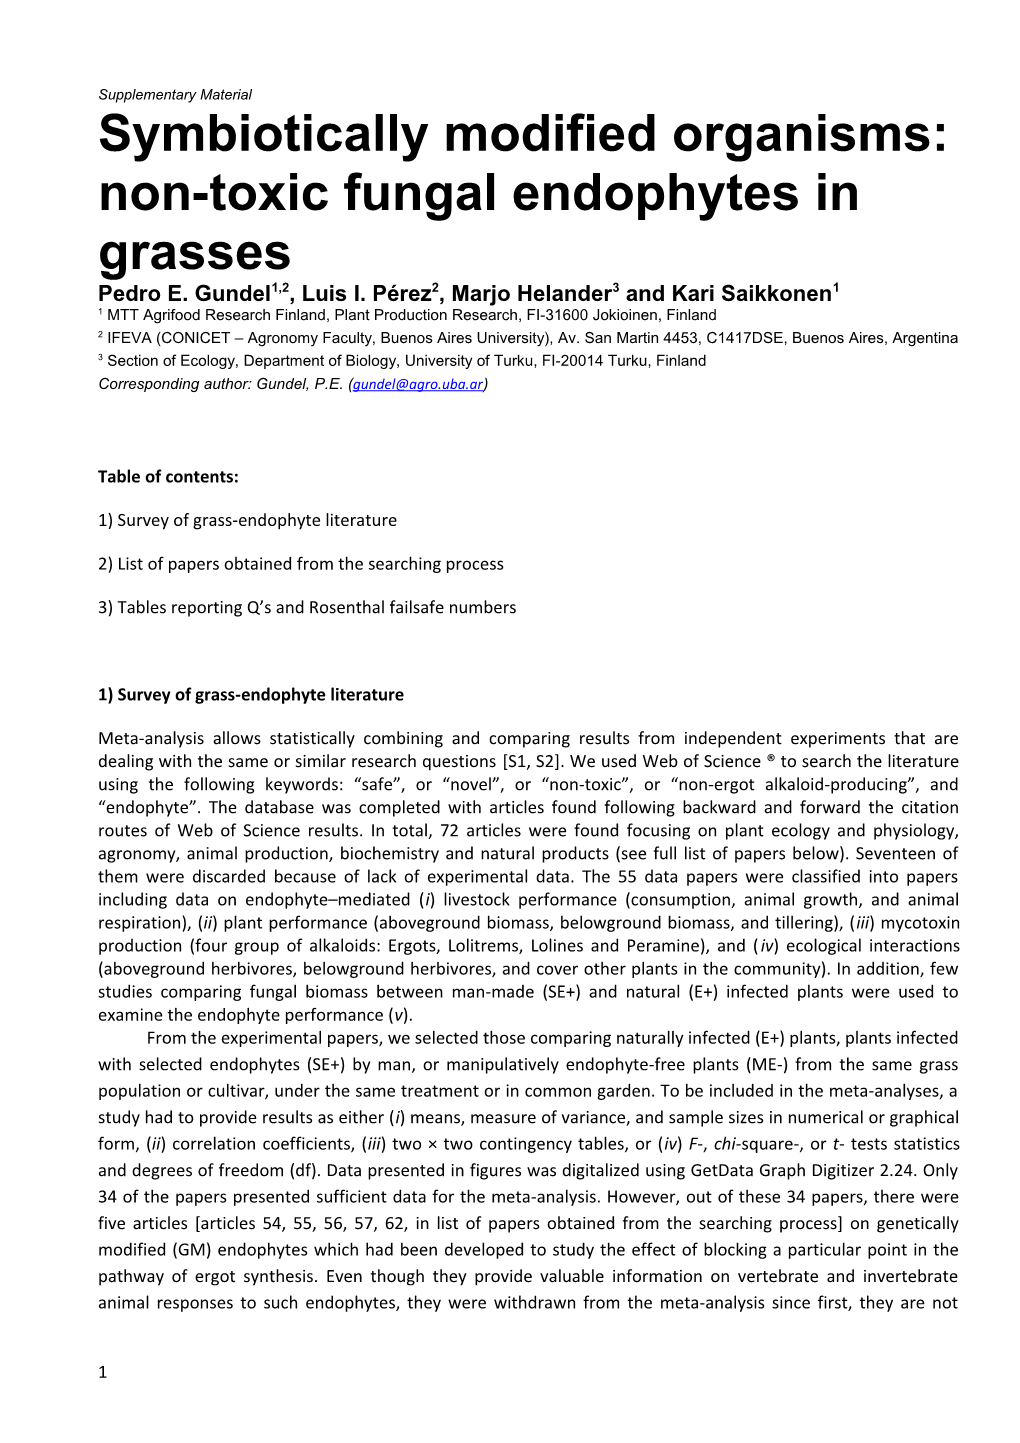 Symbiotically Modified Organisms: Non-Toxic Fungal Endophytes in Grasses